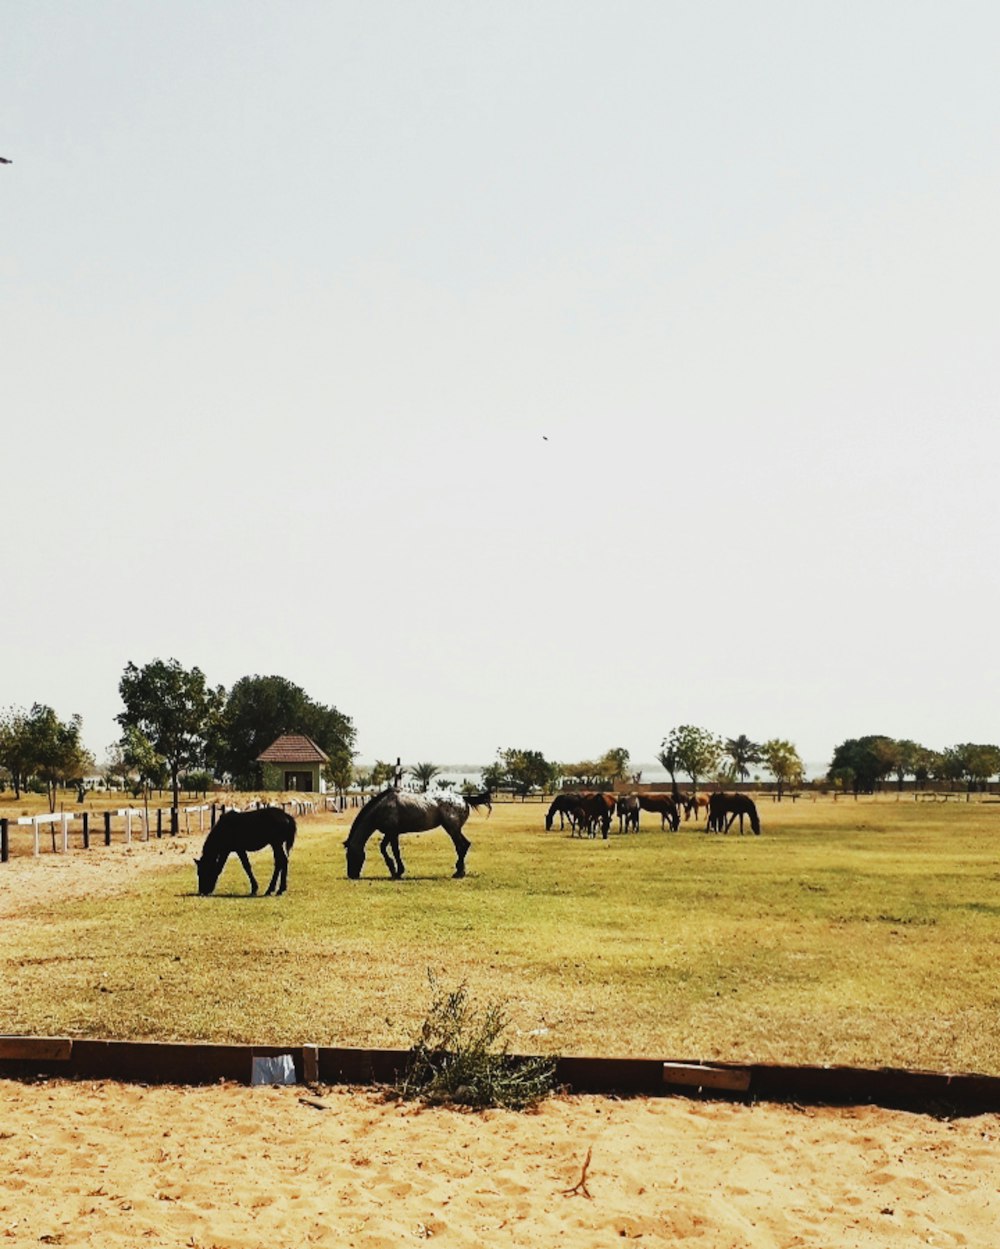 horses at the farm during daytime